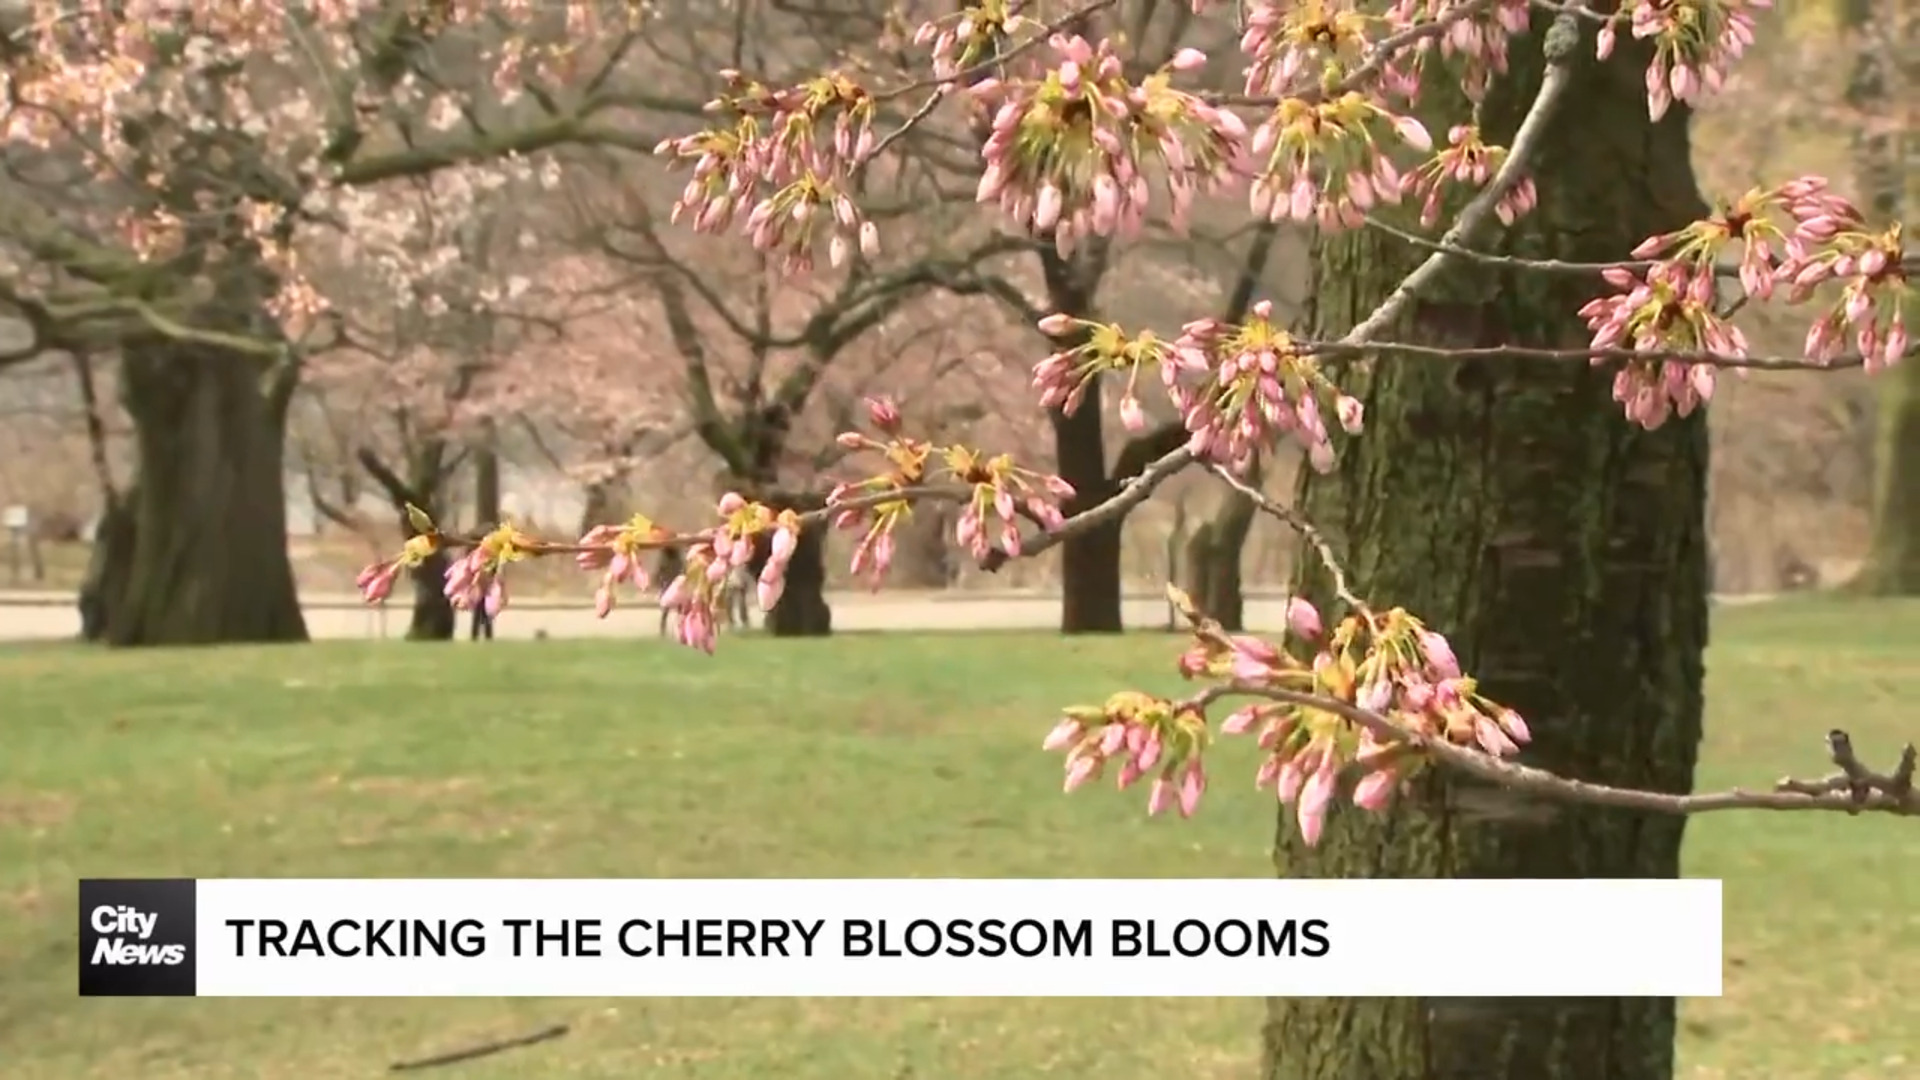 Tracking High Park’s cherry blossom blooms